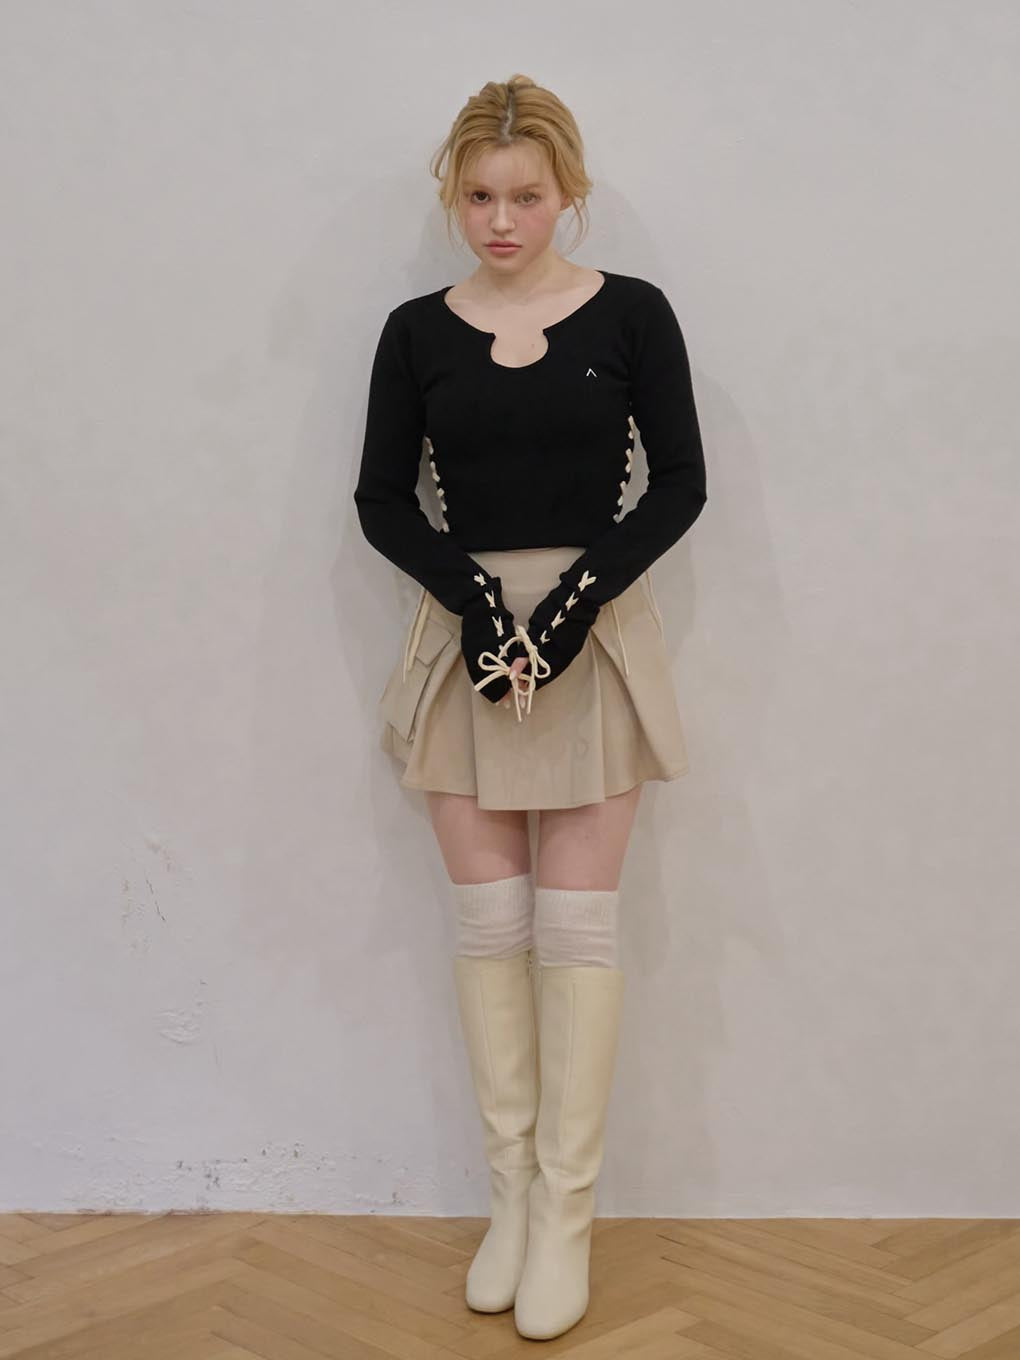 andmary   Millie ribbon knit tops新品未使用